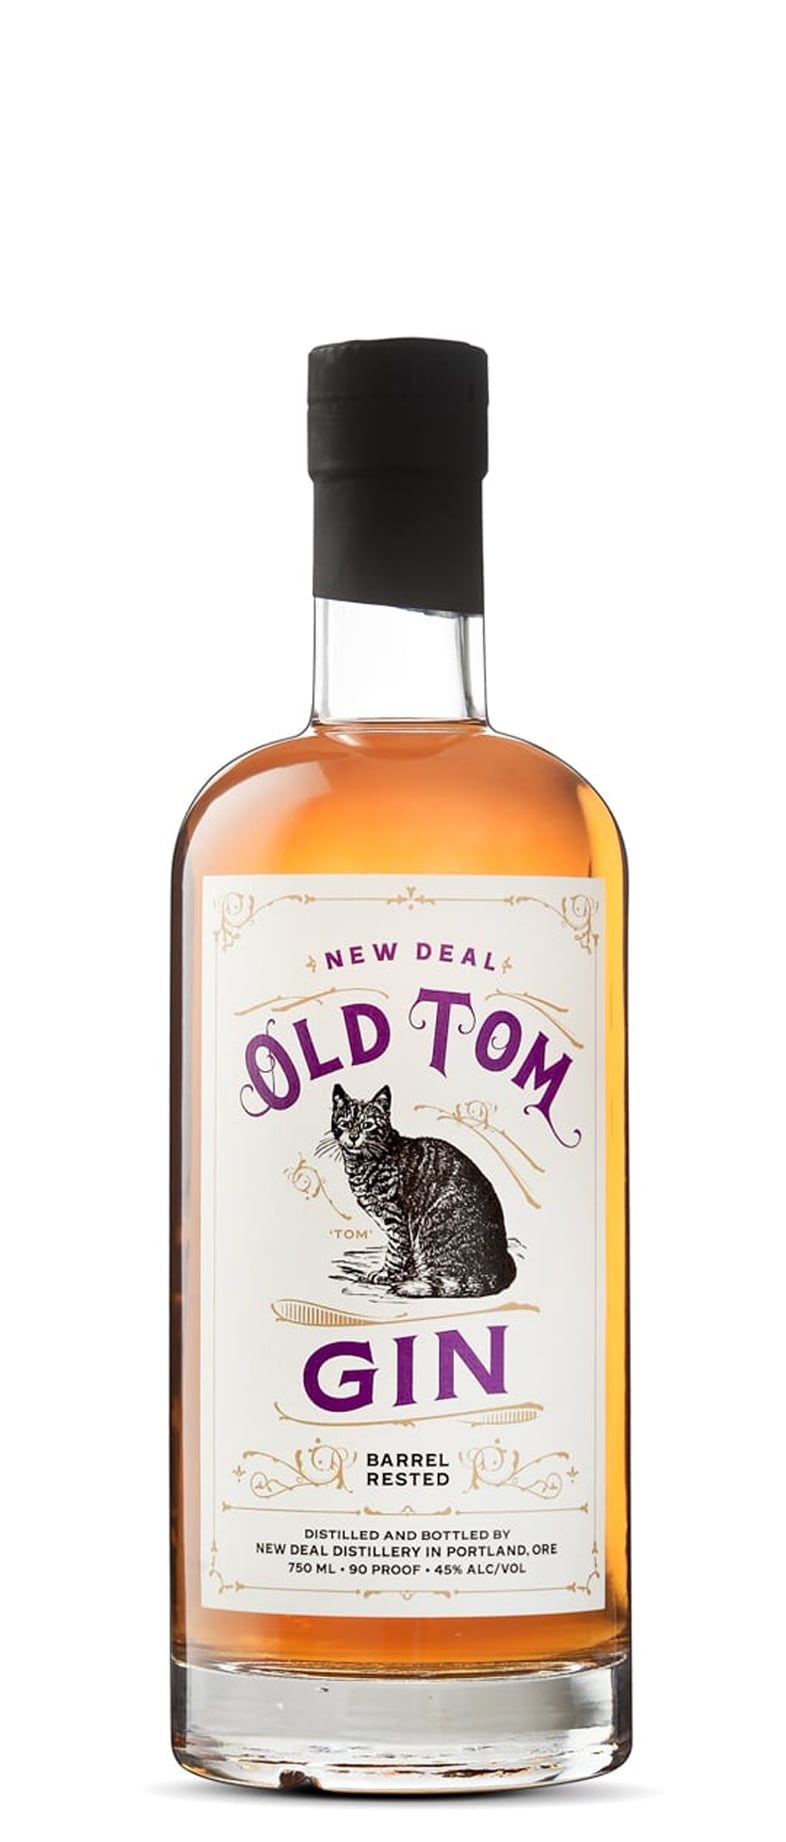 New Deal Distillery - New Deal Old Tom Gin